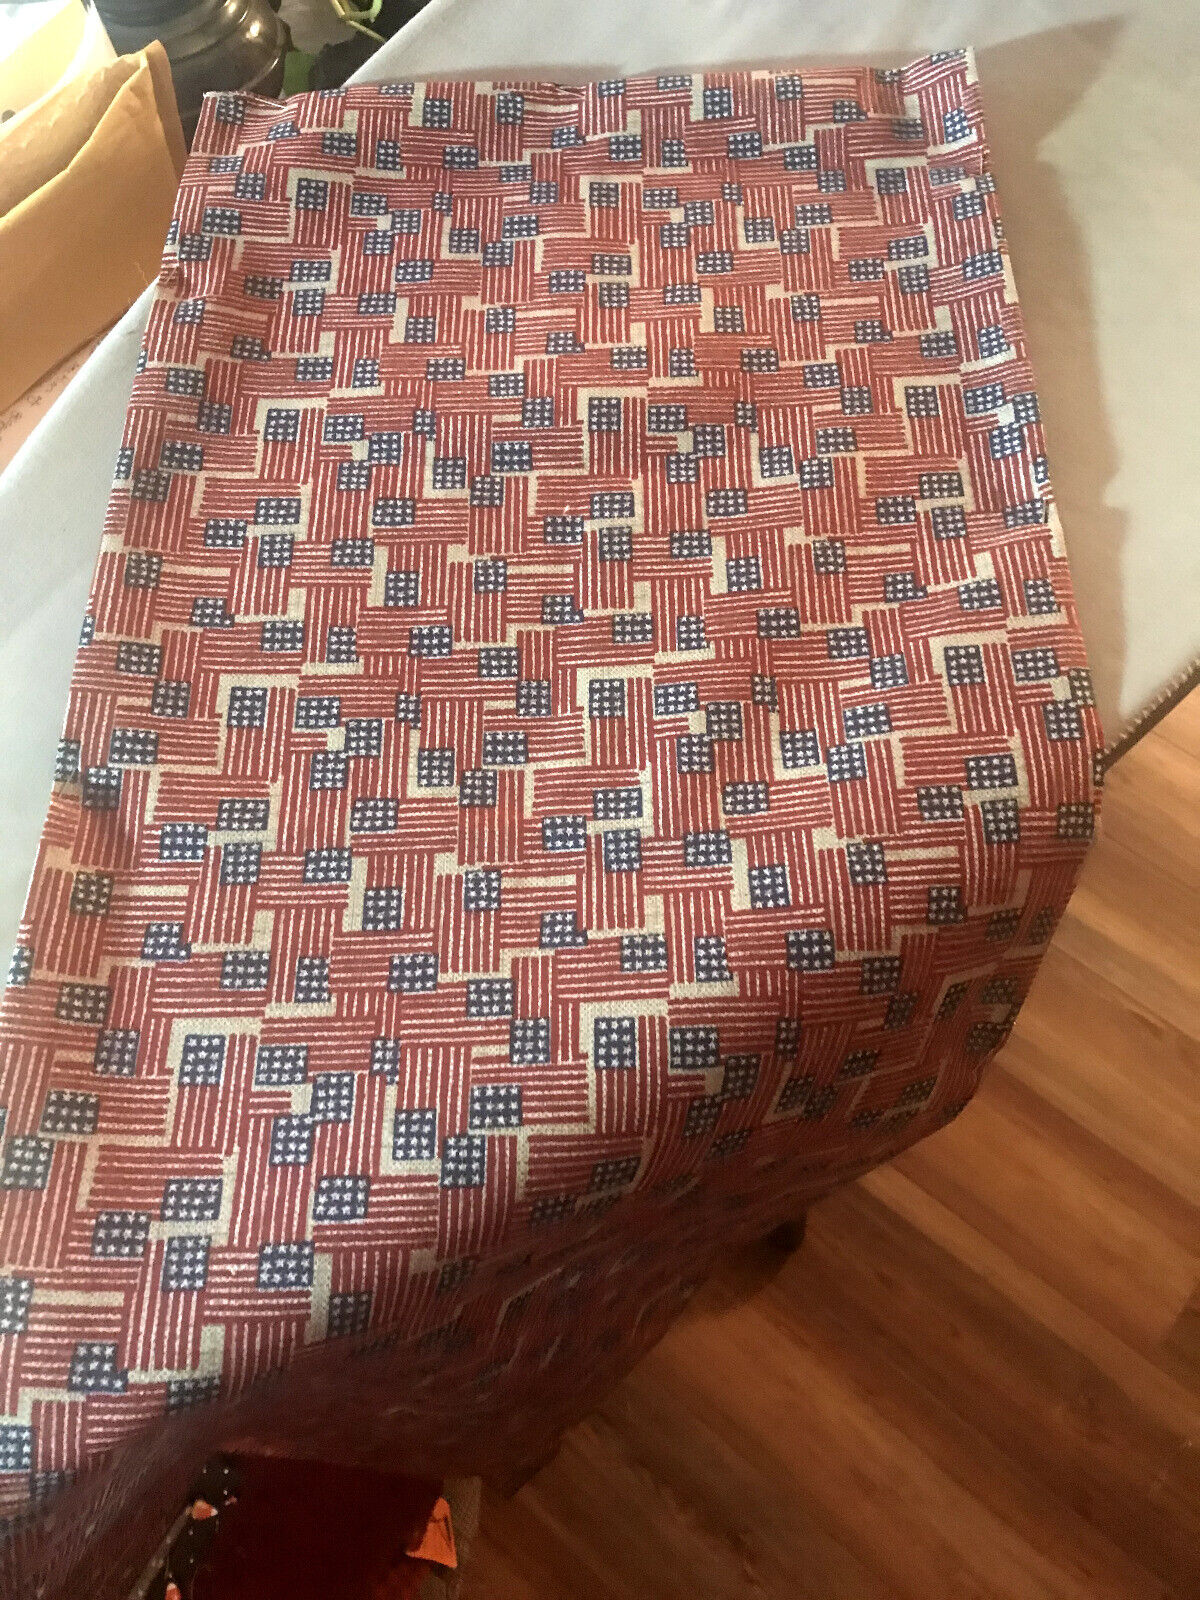 Custom-made w/ LONGABERGER OLD GLORY flag fabric table runner - diff widths